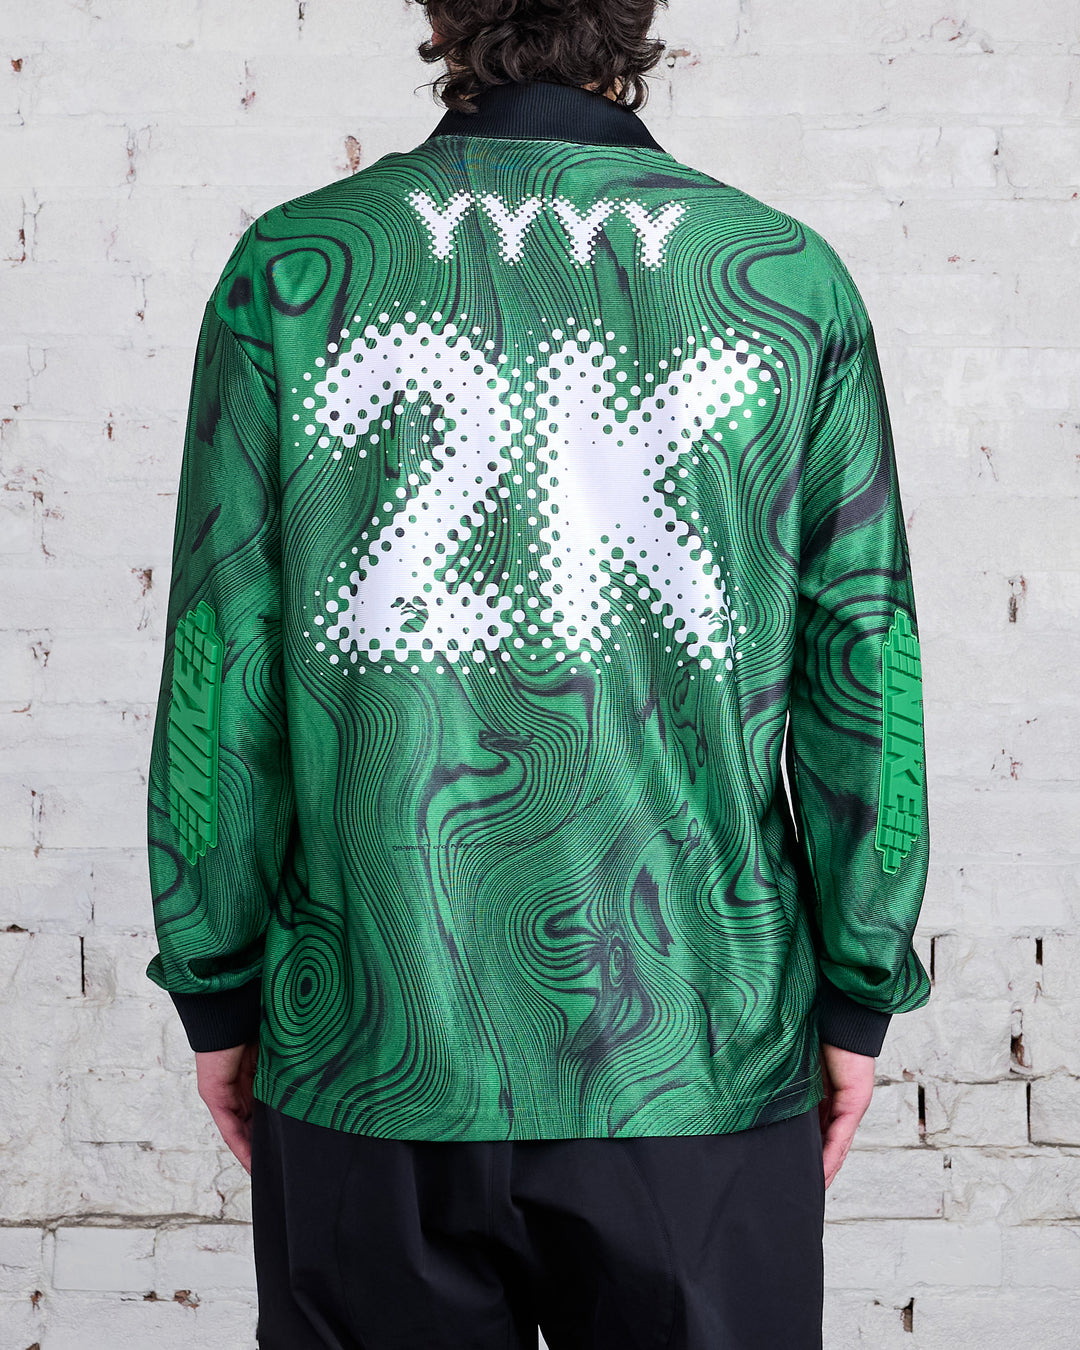 Nike x Off-White™ Allover Print Jersey Kelly Green